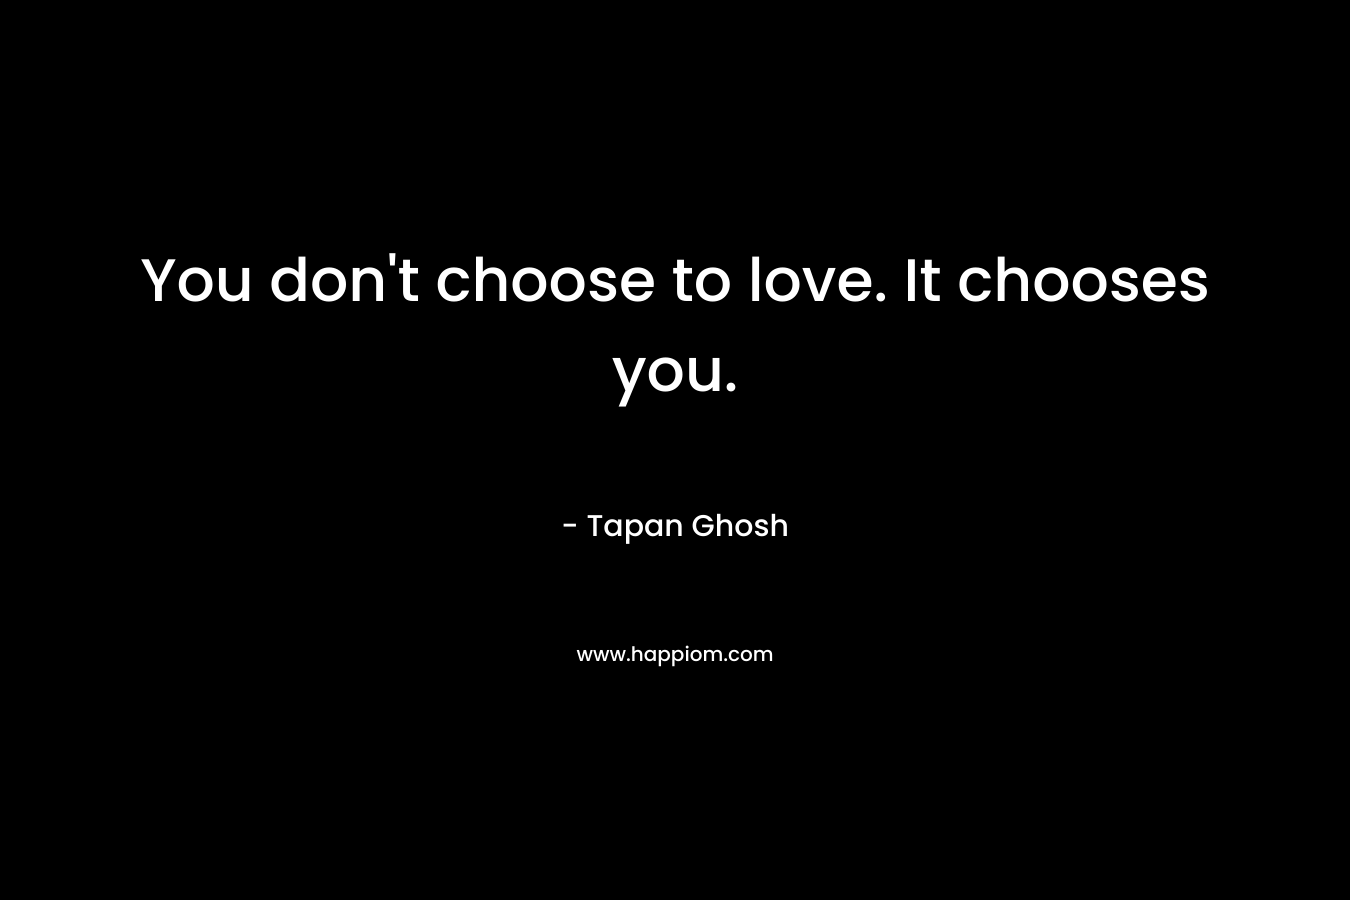 You don't choose to love. It chooses you.